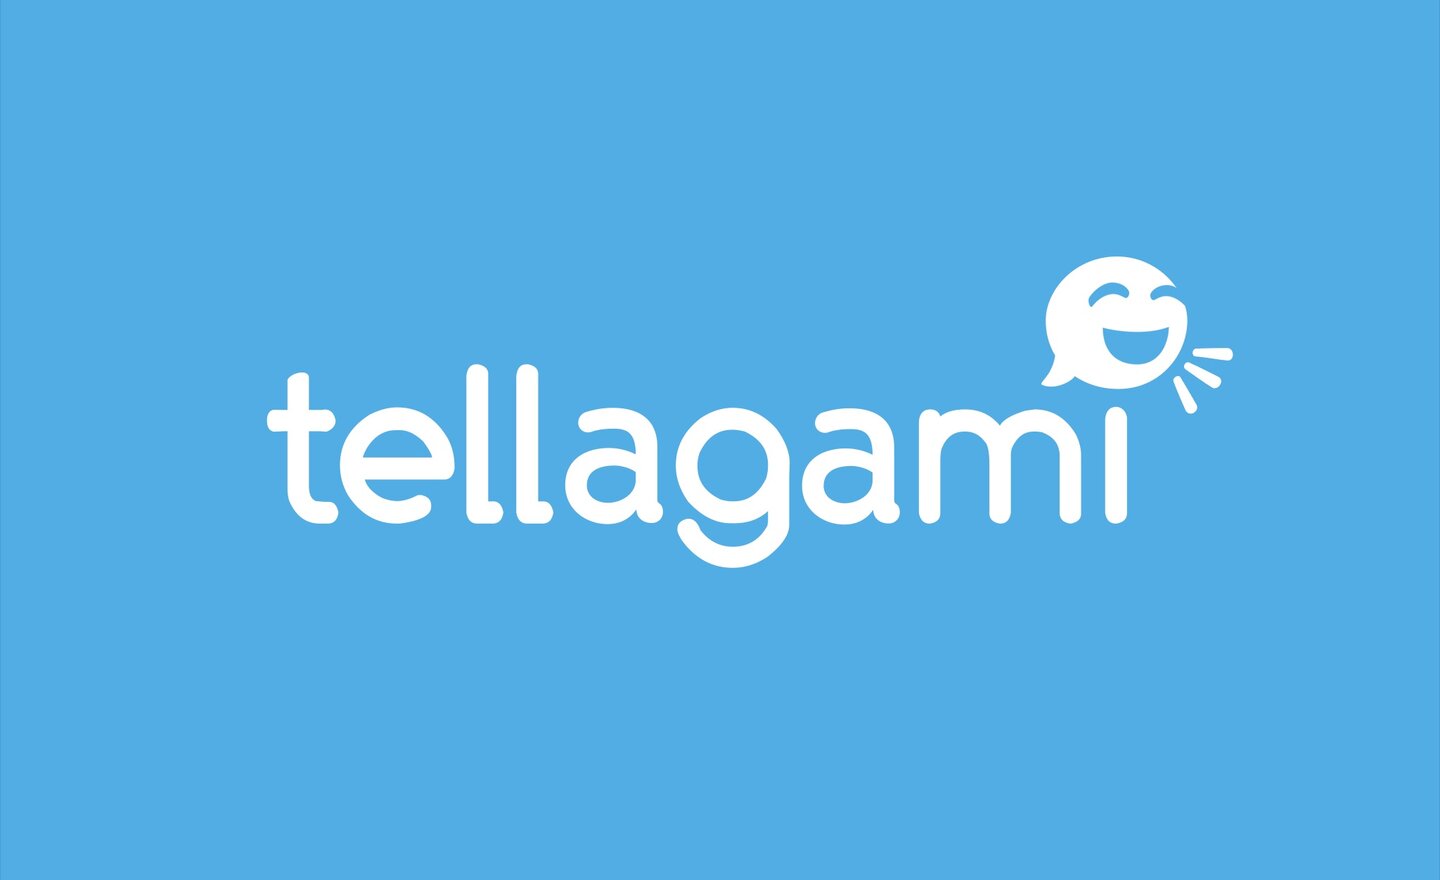 Image of Totally tellagami